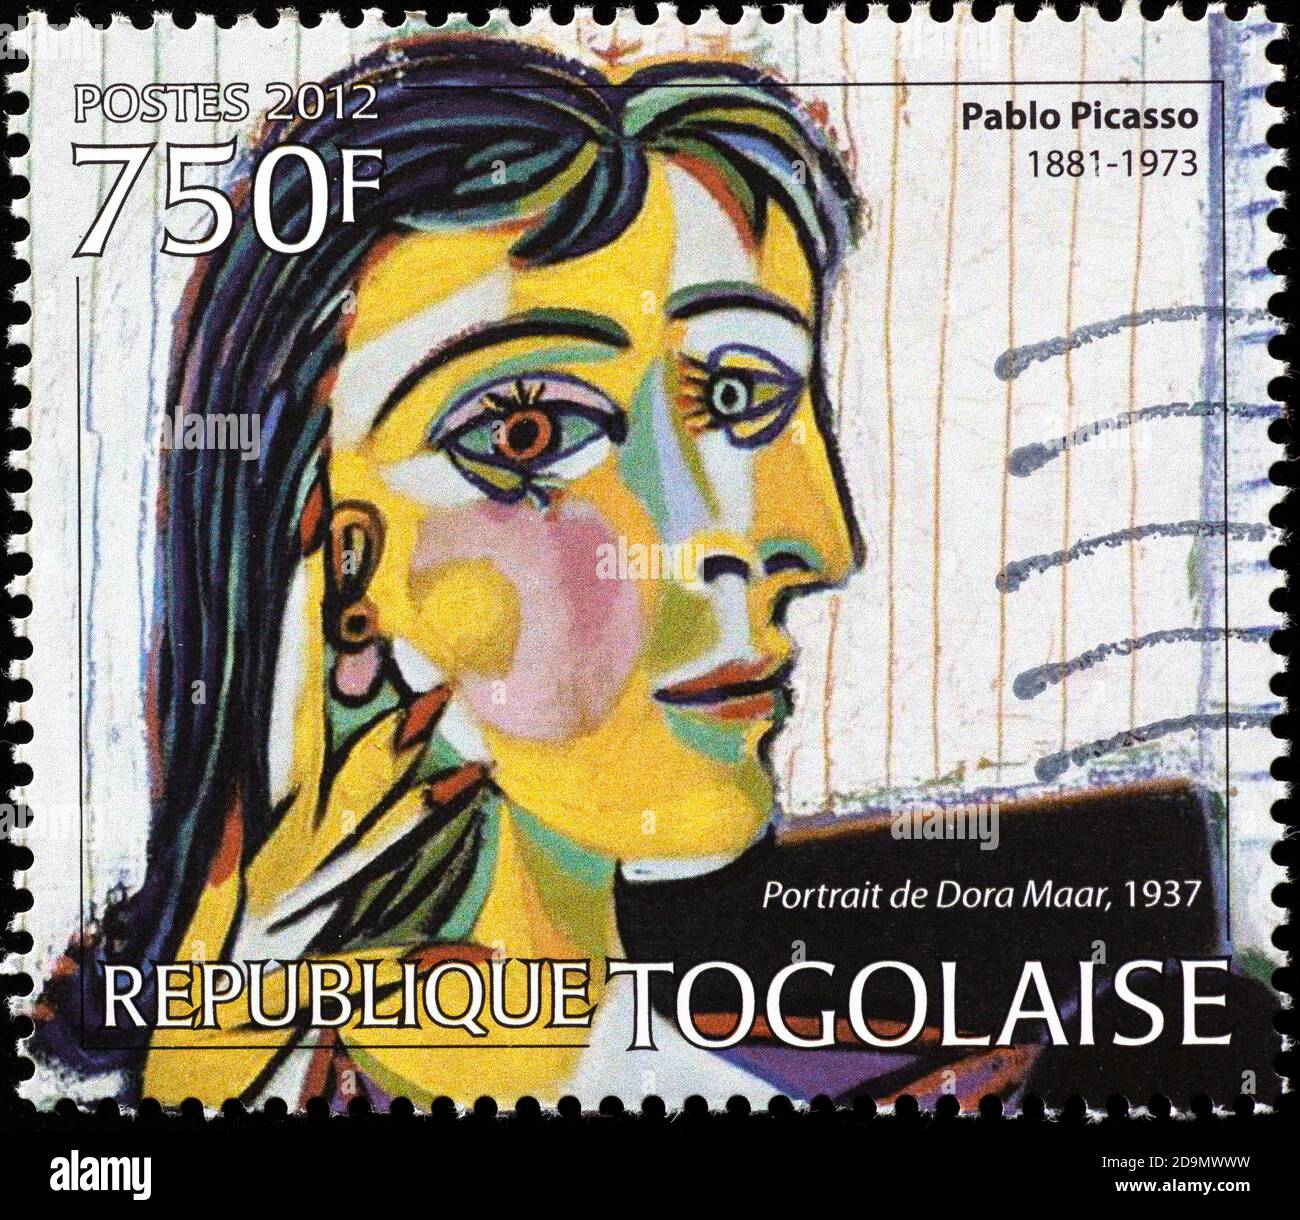 Portrait of Dora Maar by Picasso on stamp Stock Photo